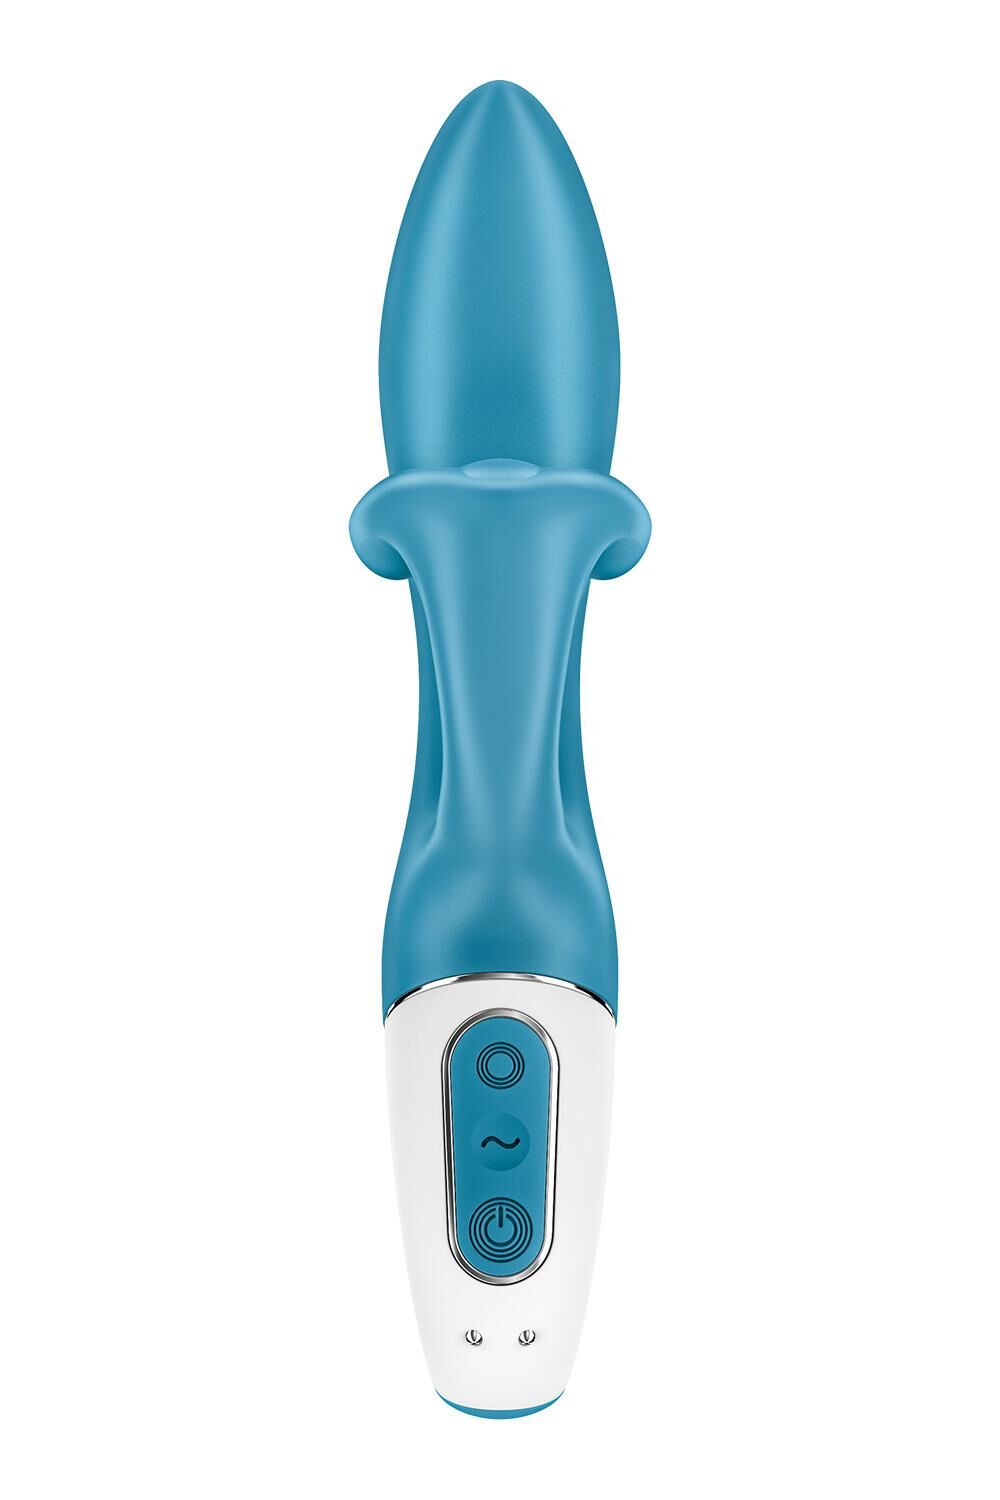   Satisfyer Embrace me Turquoise